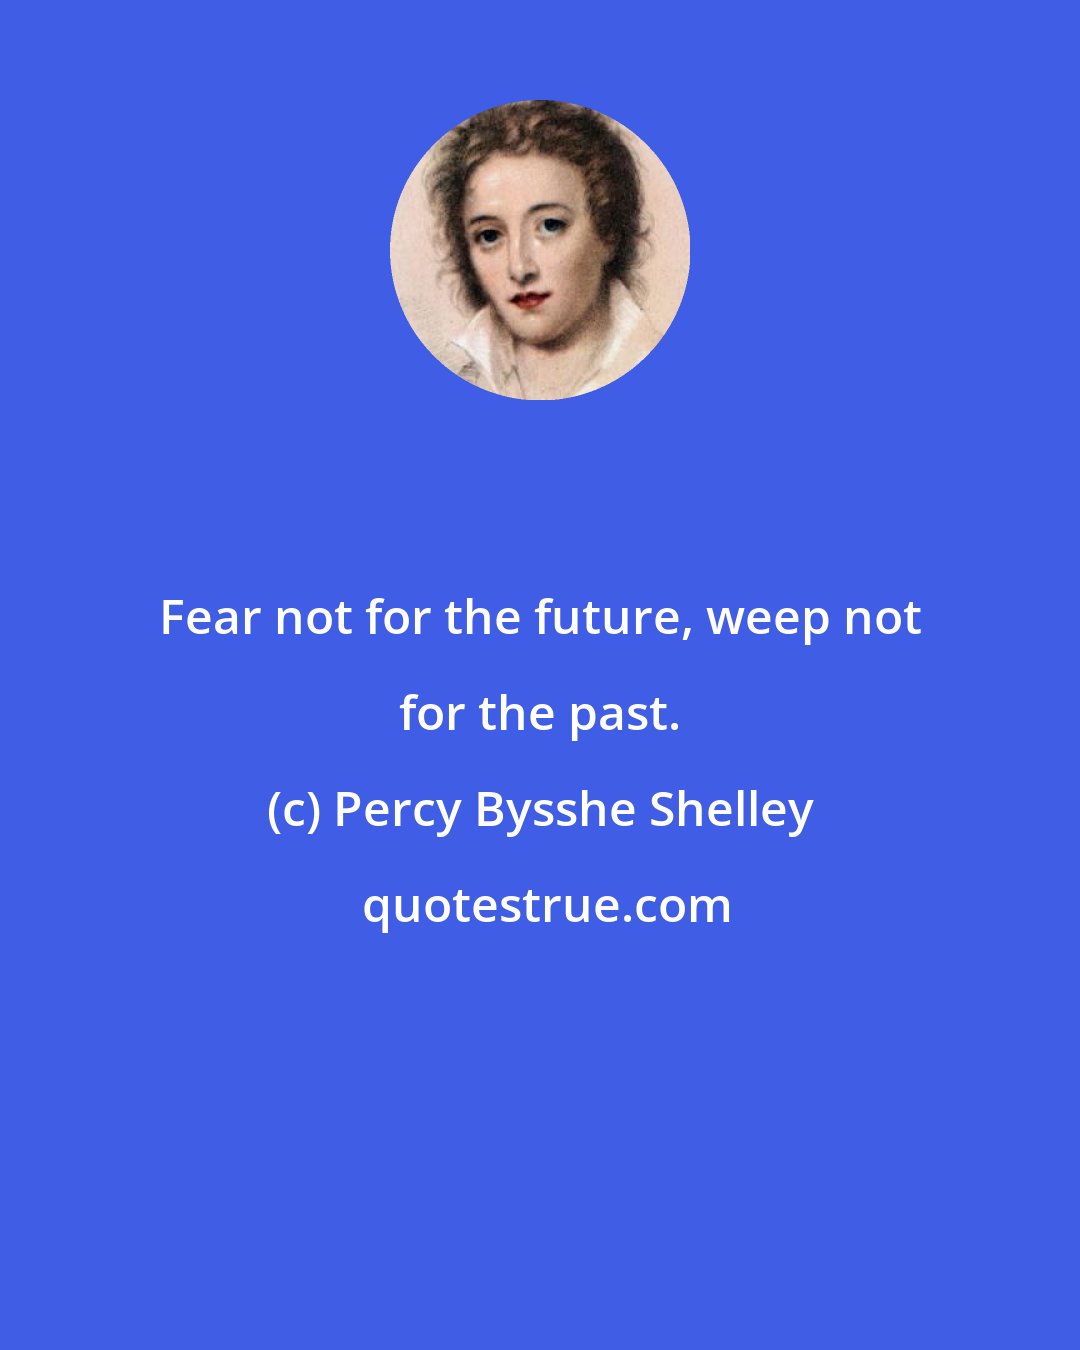 Percy Bysshe Shelley: Fear not for the future, weep not for the past.